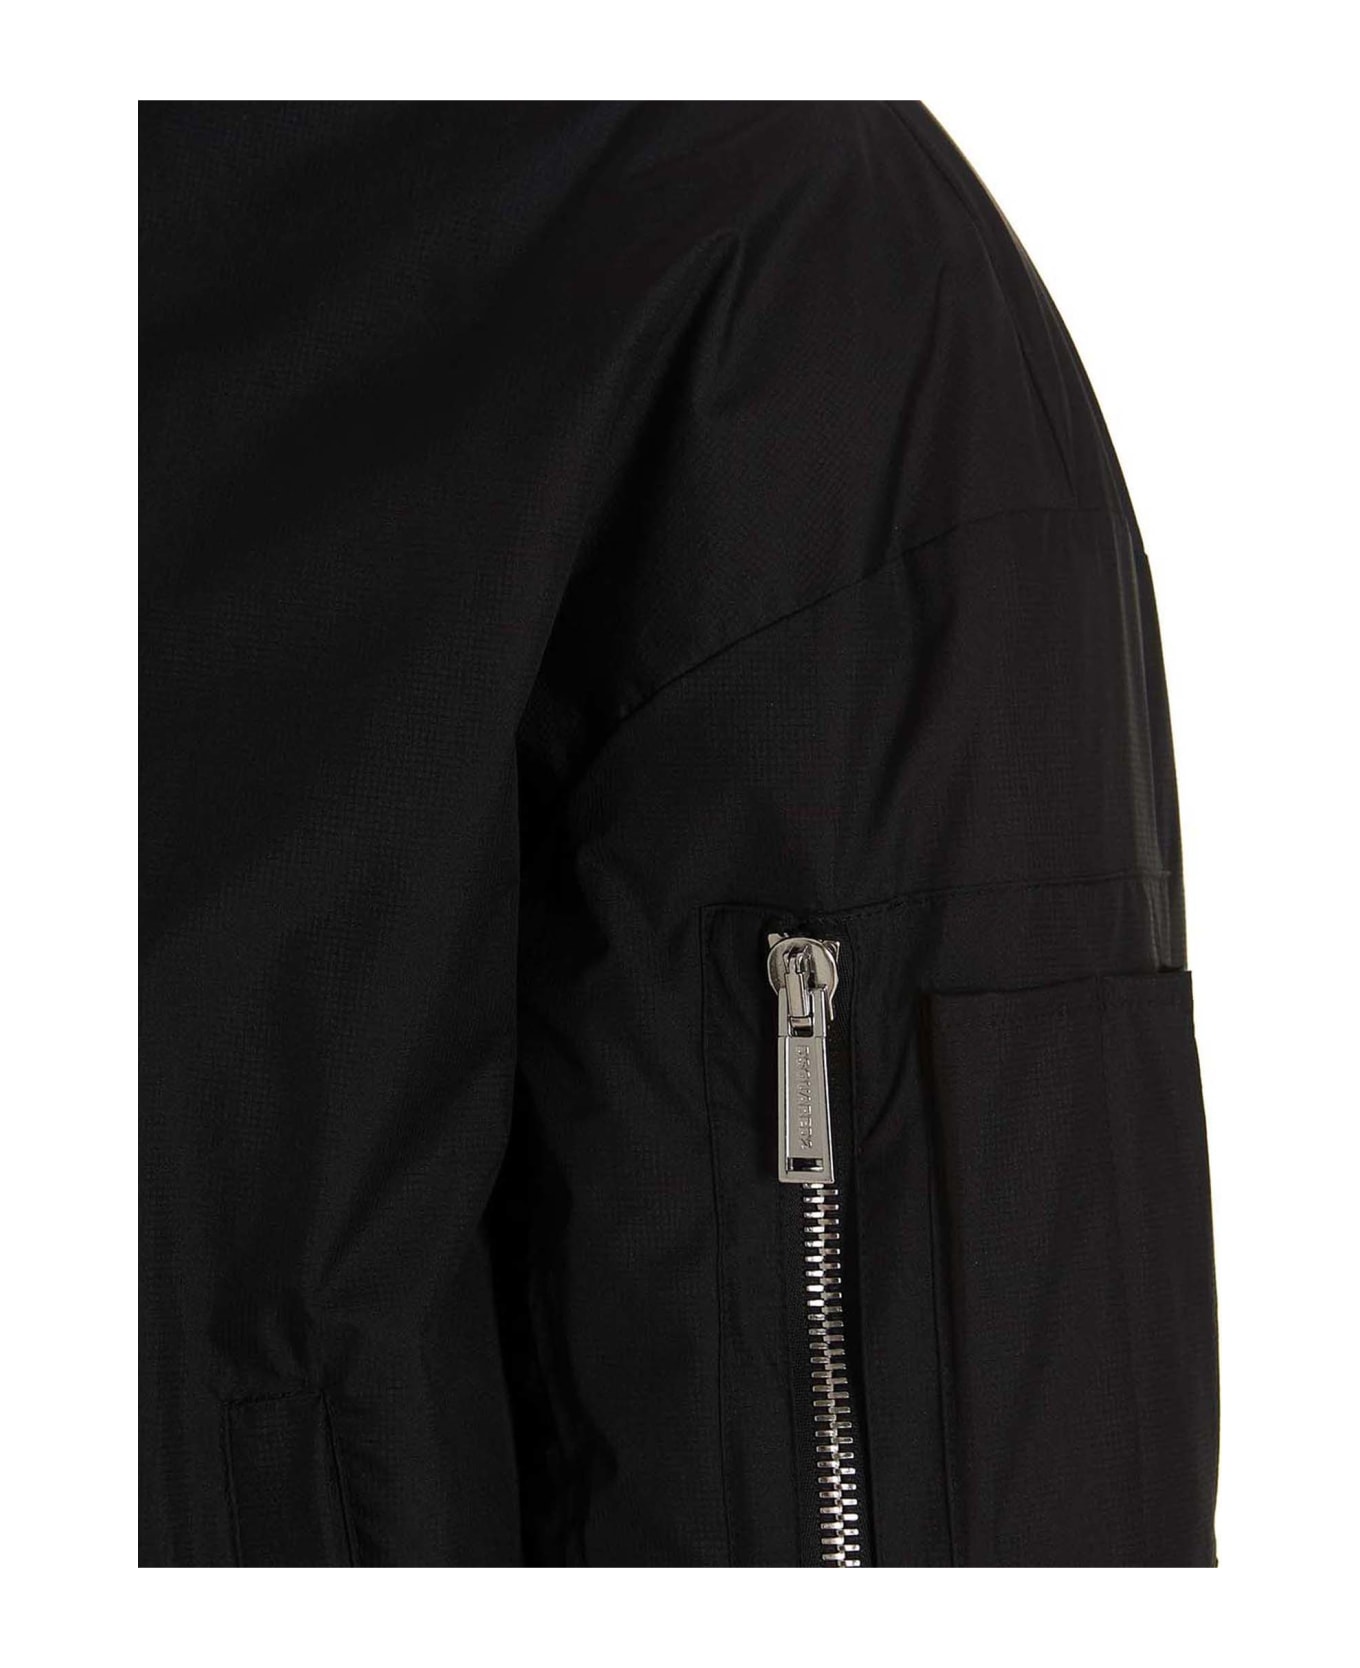 Dsquared2 'd2 On The Wave' Bomber - Black  